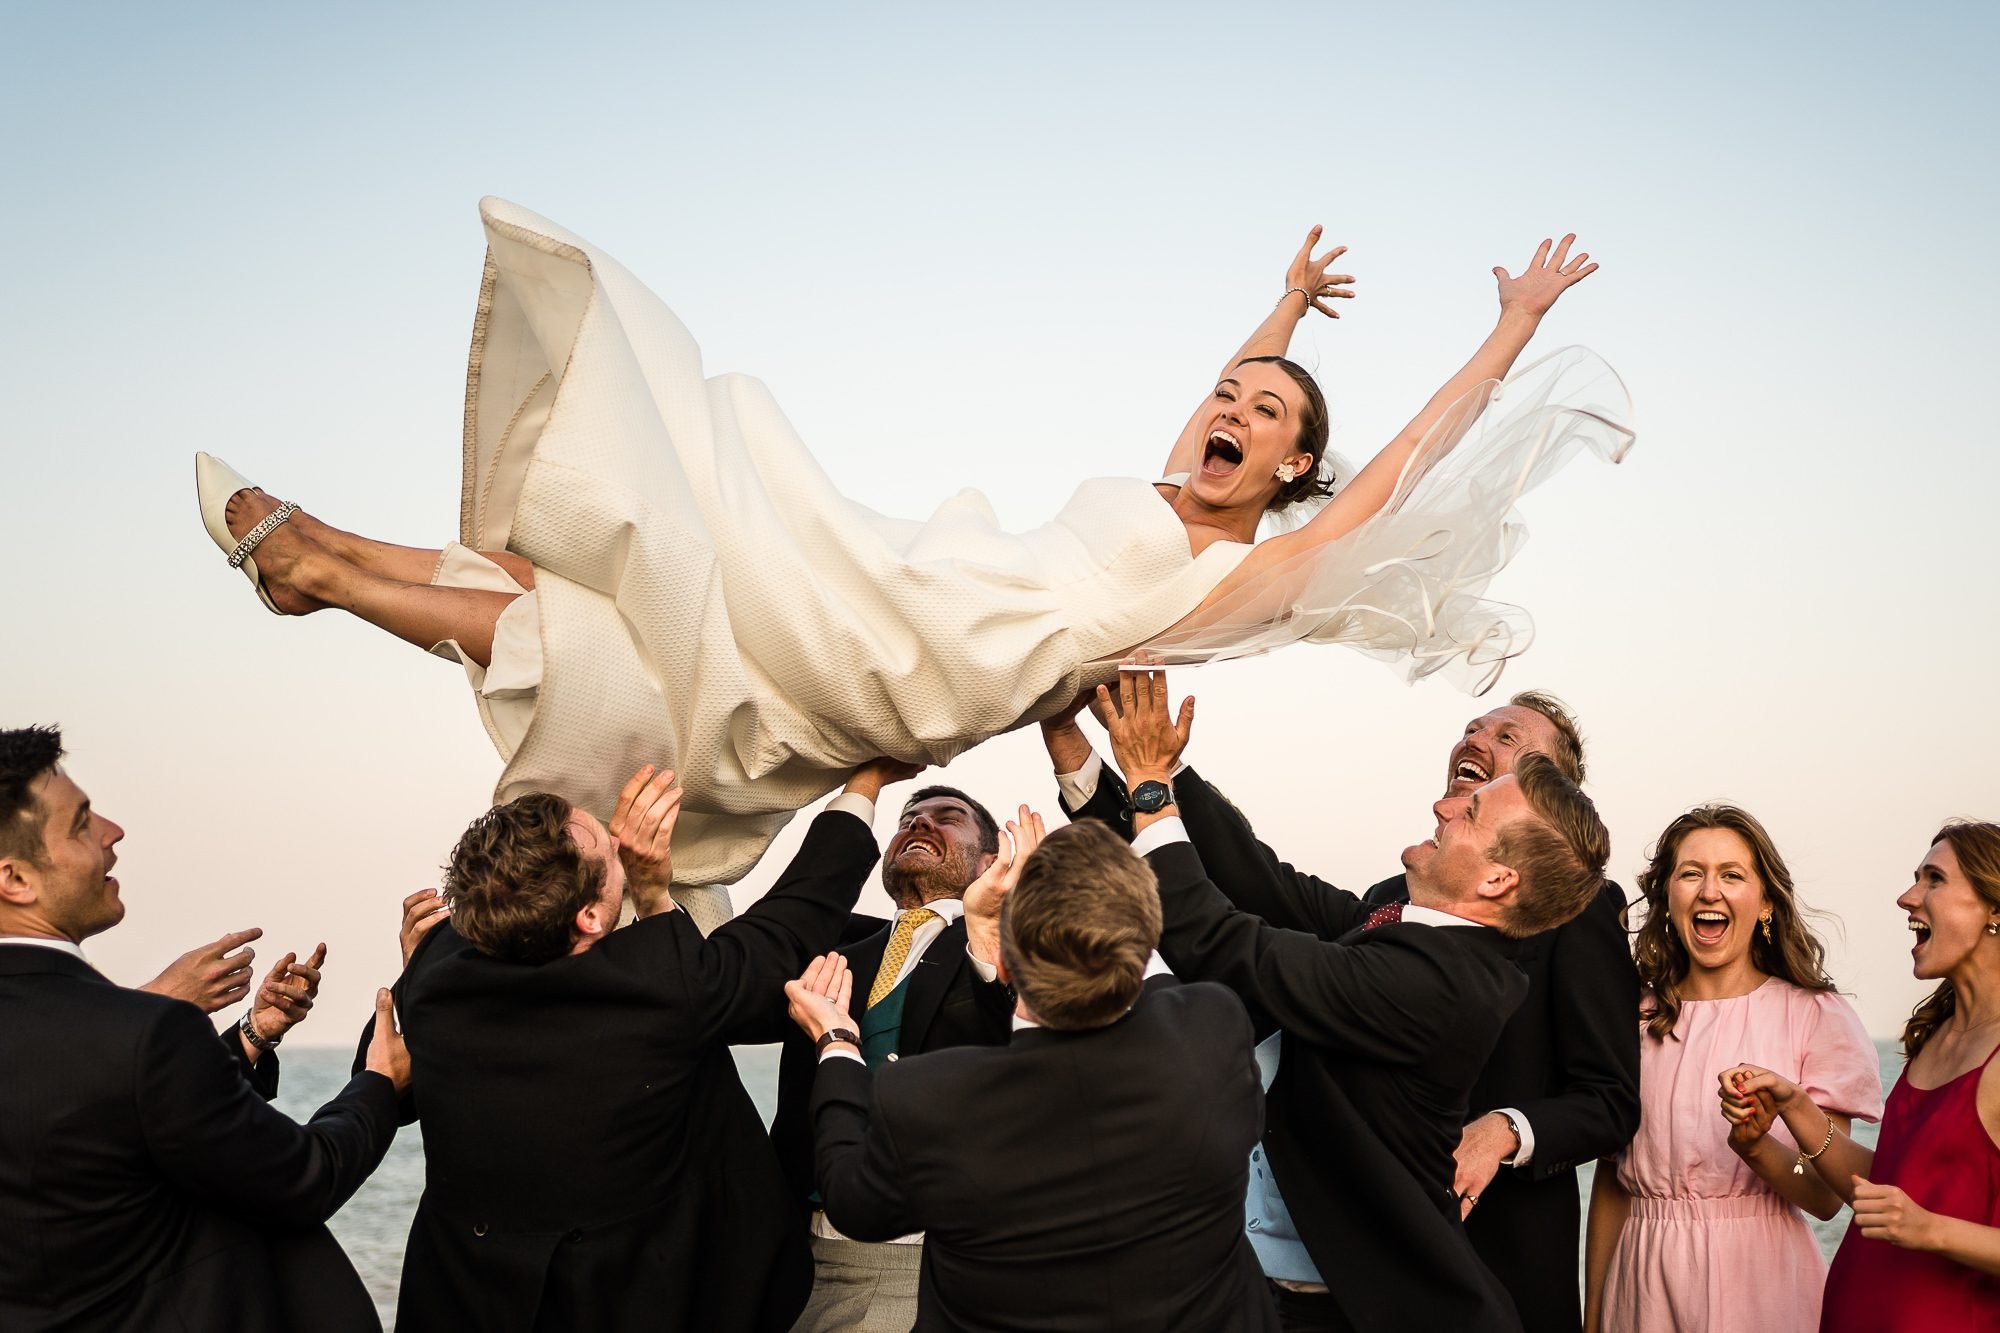 A bride laughs as she is thrown into the air by Groomsmen and her groom who are also laughing. Seaside location